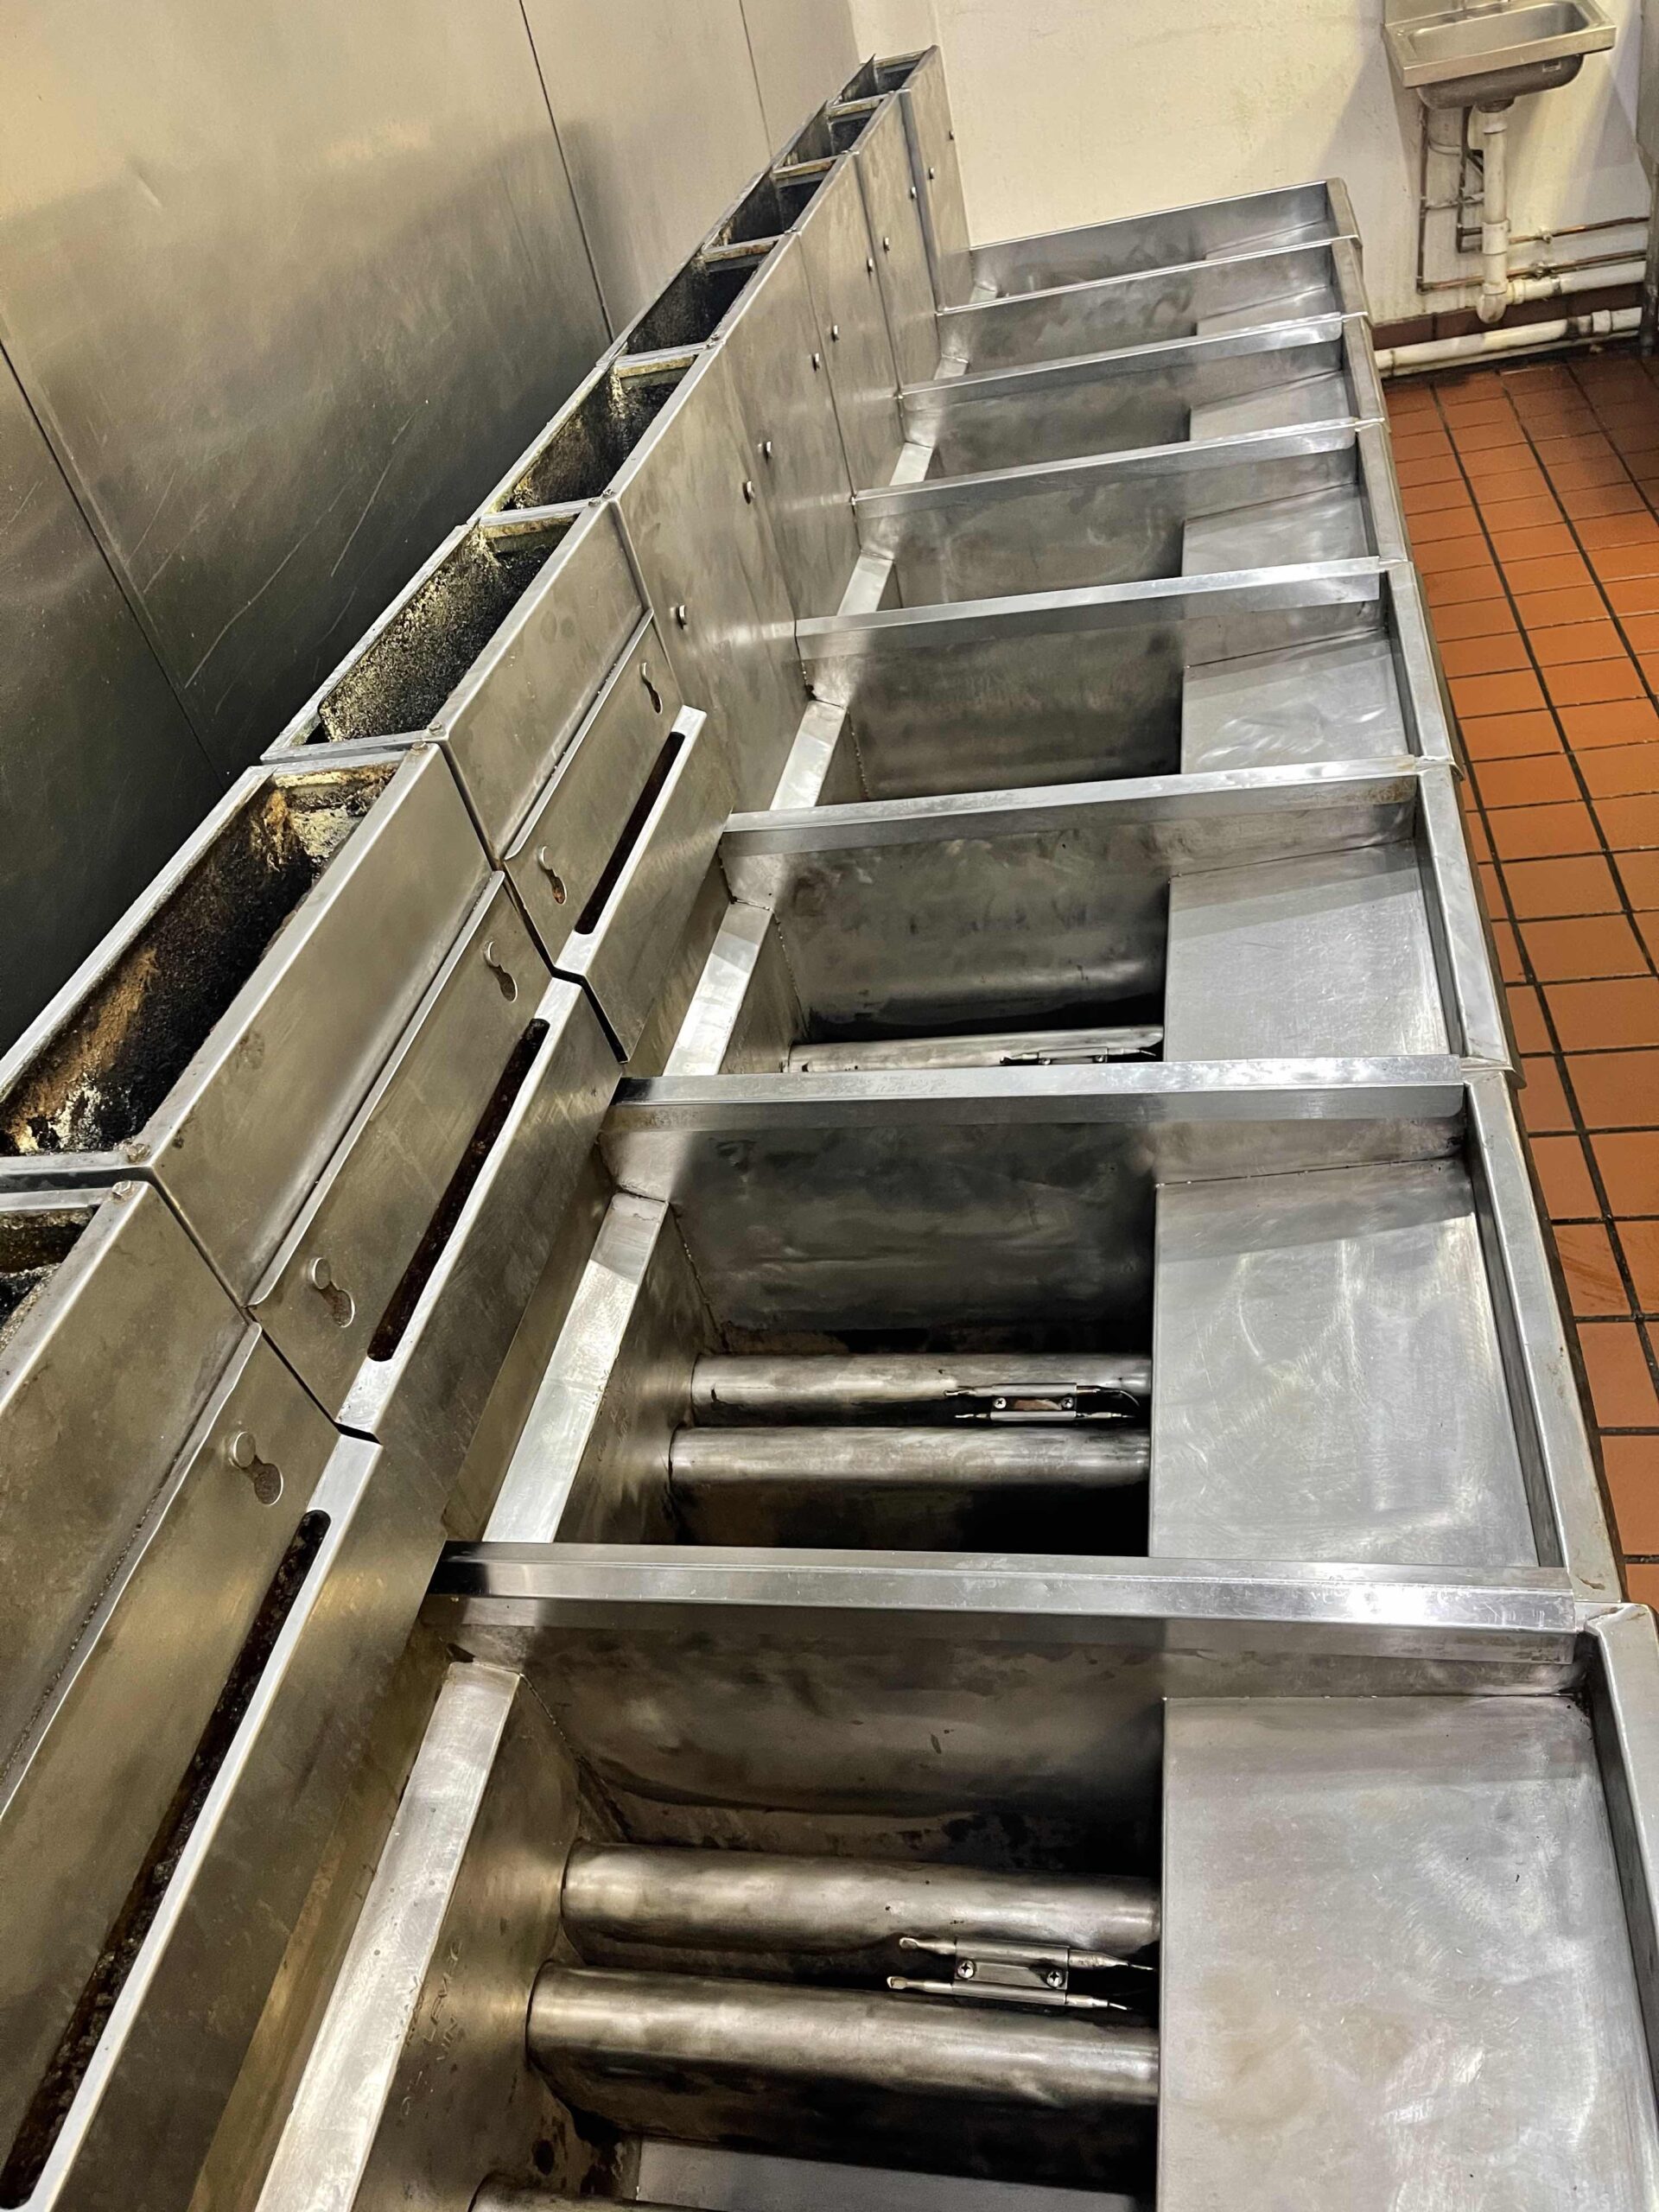 Commercial Fryer Cleaning Services | RamPro